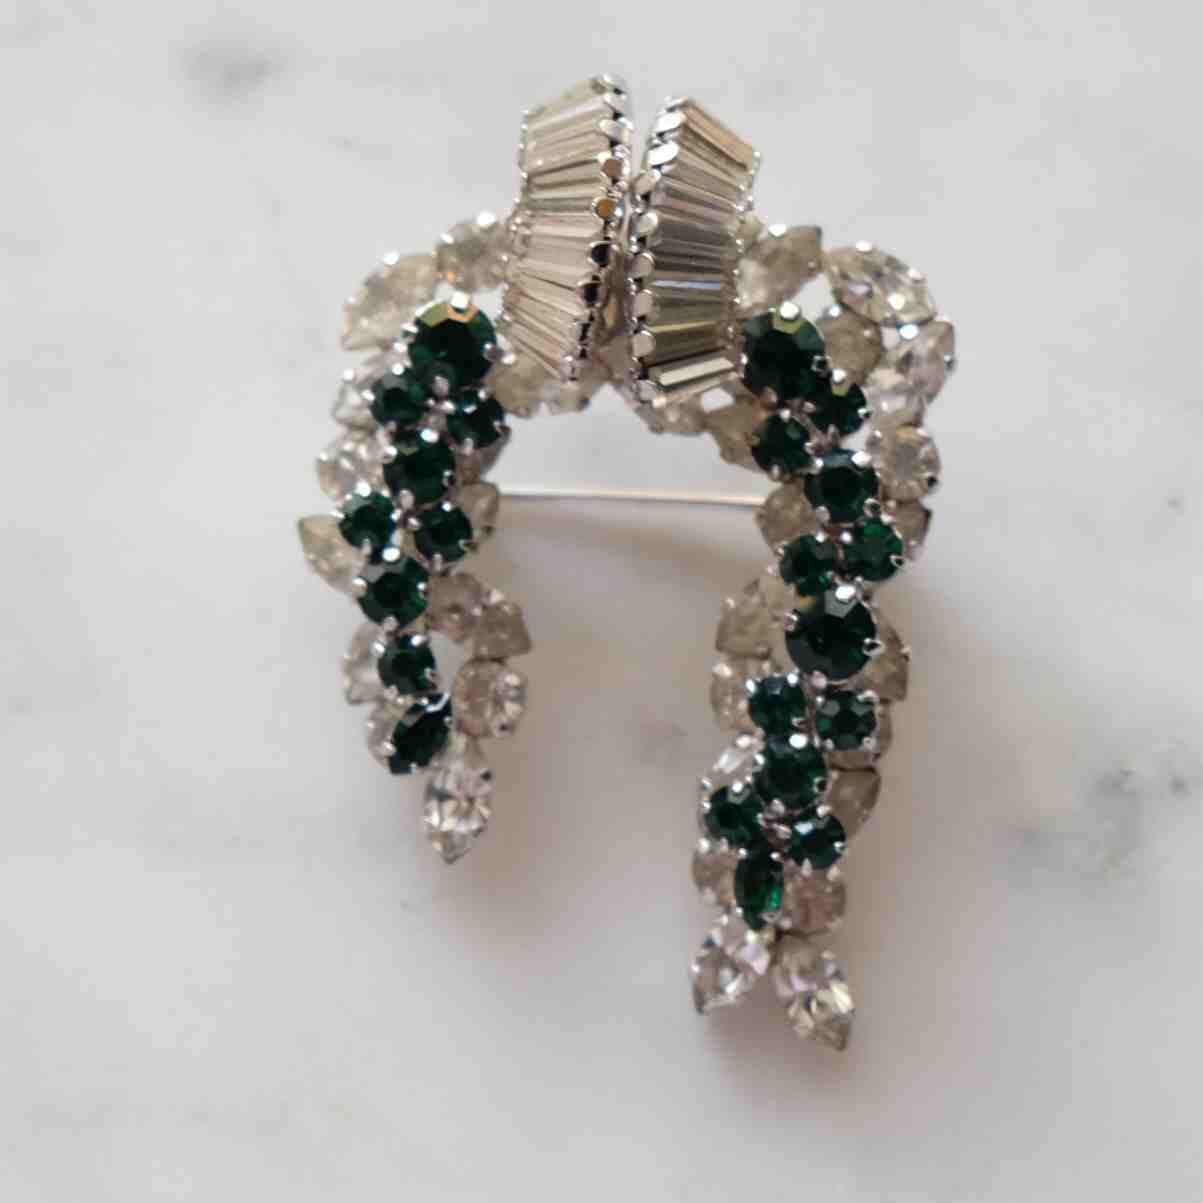 Vintage Green Crystals Unsigned Brooch 1950's